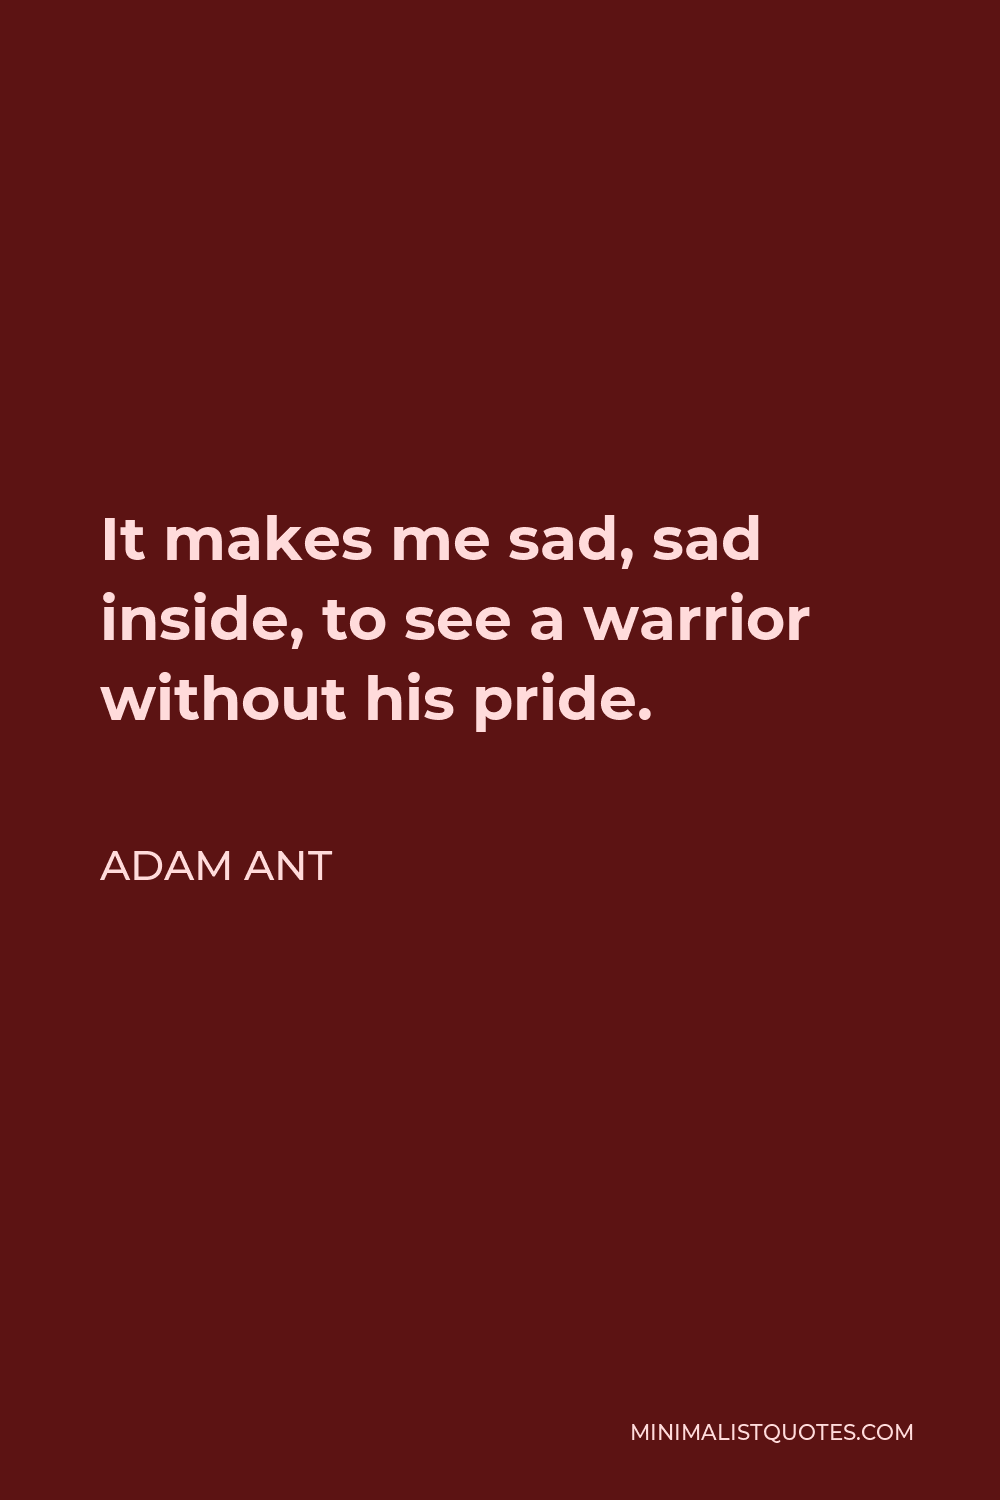 Adam Ant Quote - It makes me sad, sad inside, to see a warrior without his pride.